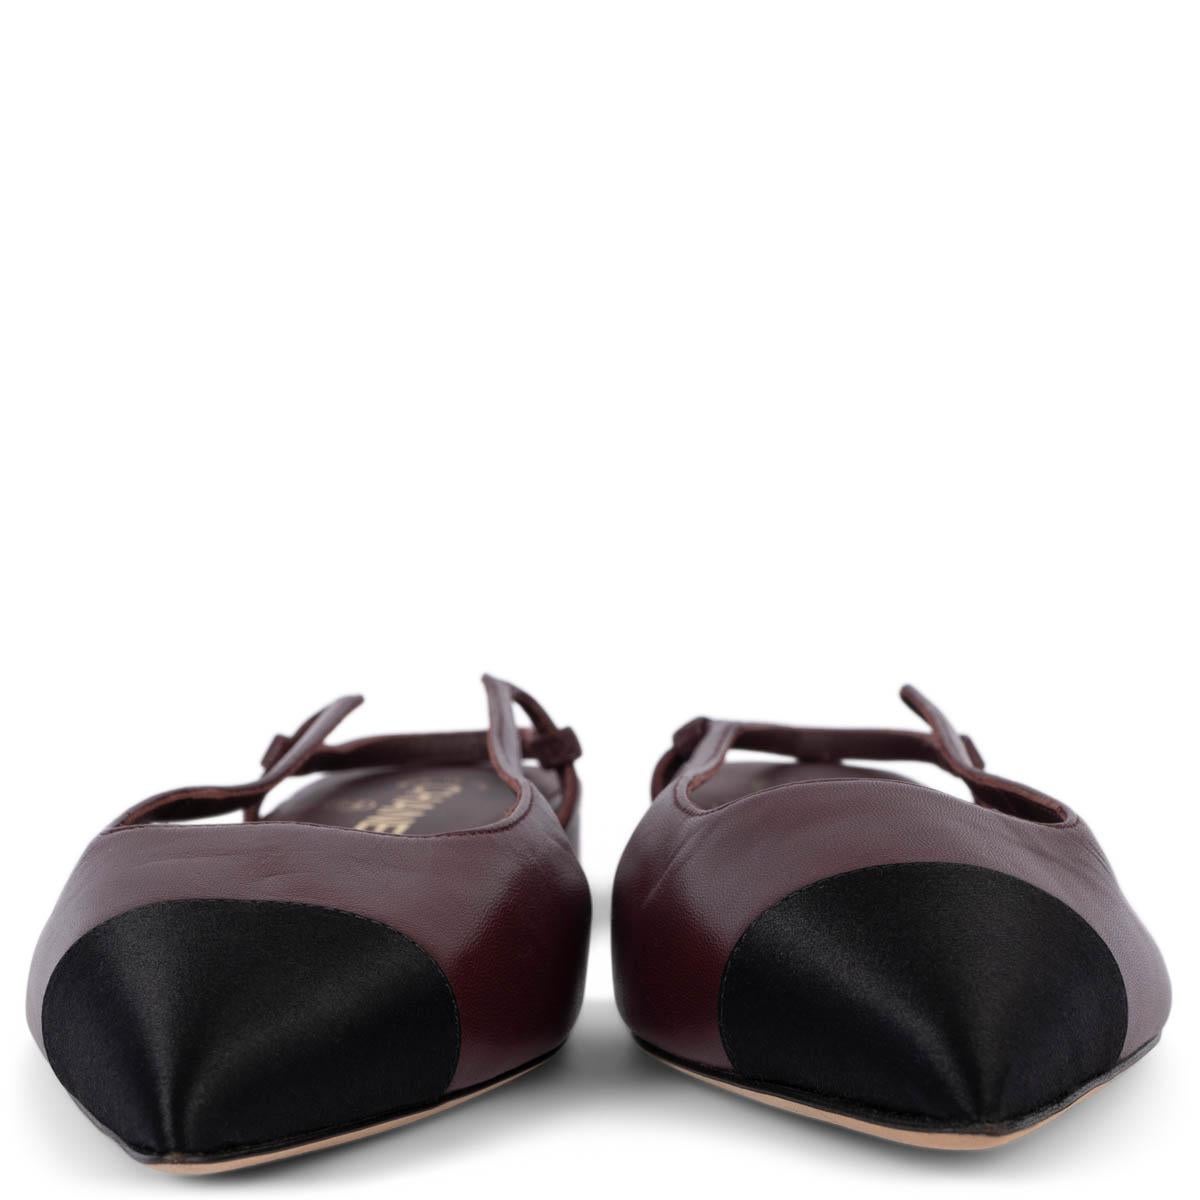 100% authentic Chanel slingback flats in burgundy leather with classic black satin cap toe. CC logo in gold-tone metal on the heel. Brand new. 

Measurements
Model	G35261
Imprinted Size	39 fit 38.5
Shoe Size	38.5
Inside Sole	26cm